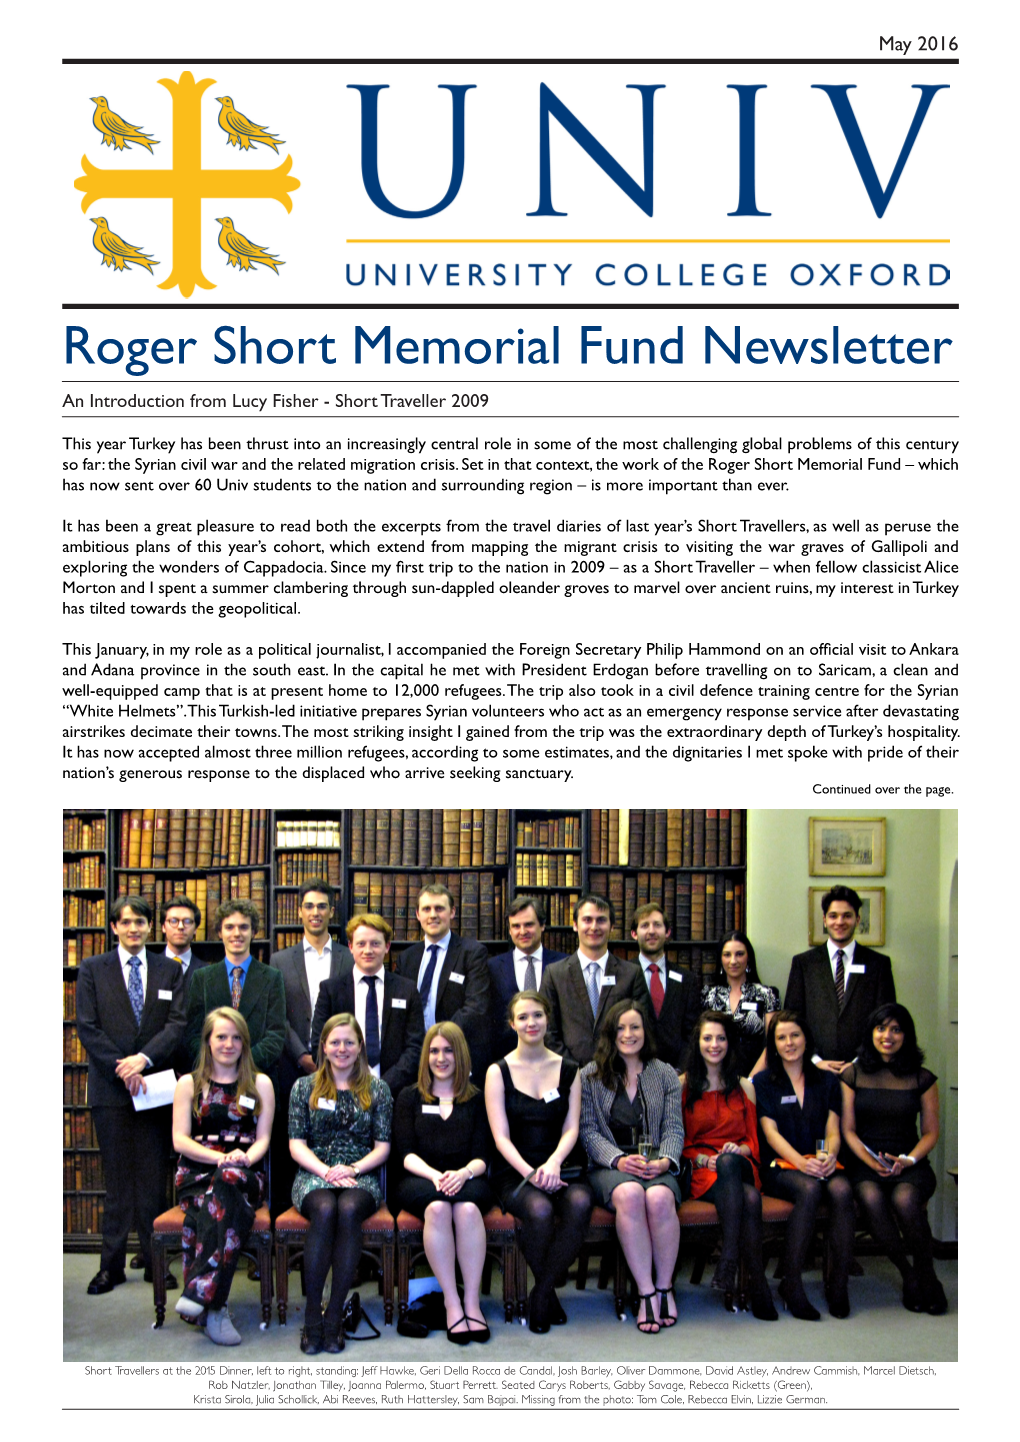 Roger Short Memorial Fund Newsletter an Introduction from Lucy Fisher - Short Traveller 2009